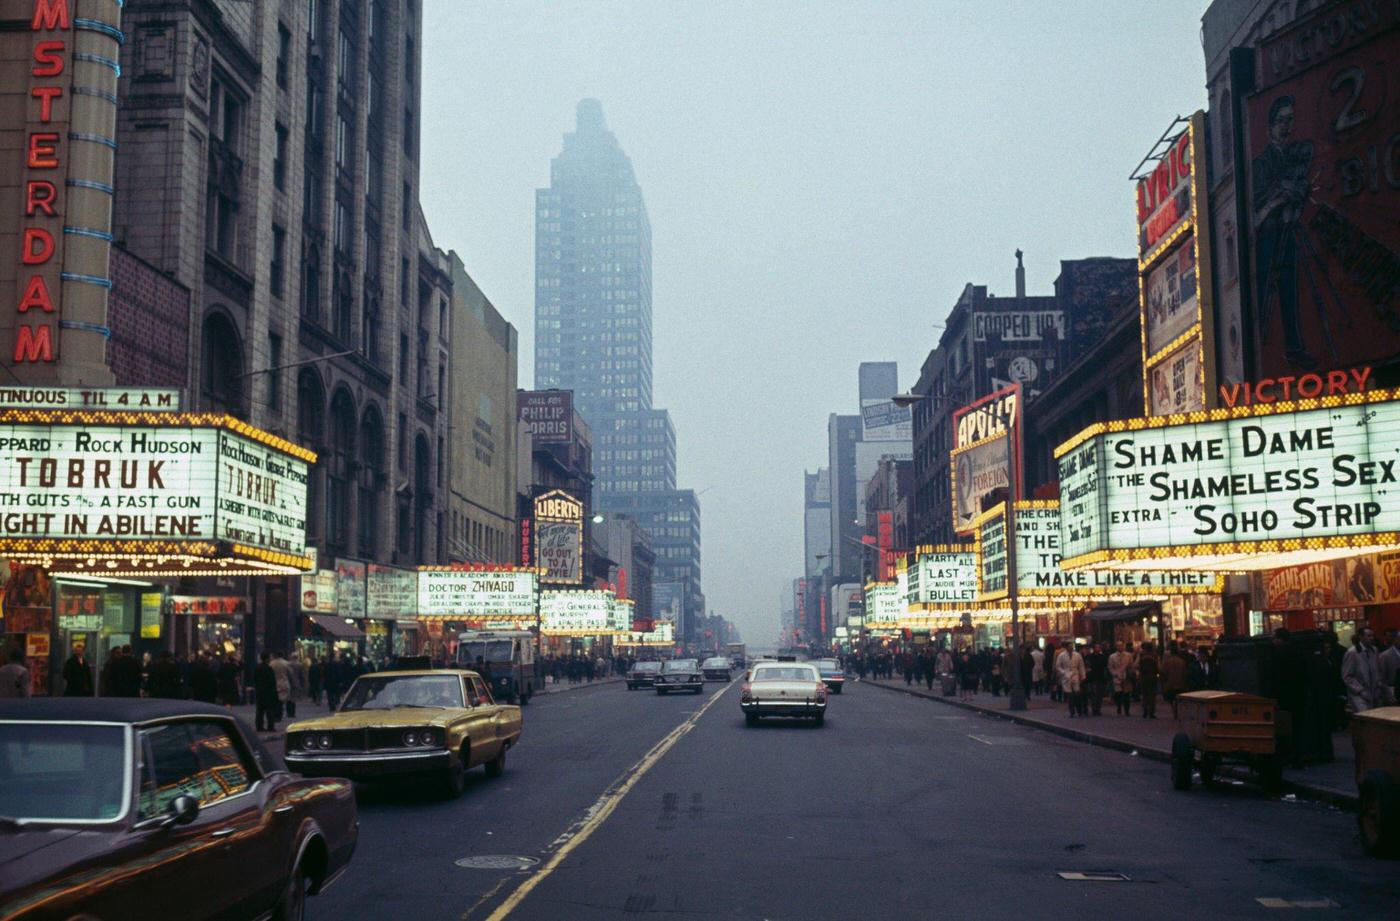 42Nd Street And Times Square, Manhattan, 1967